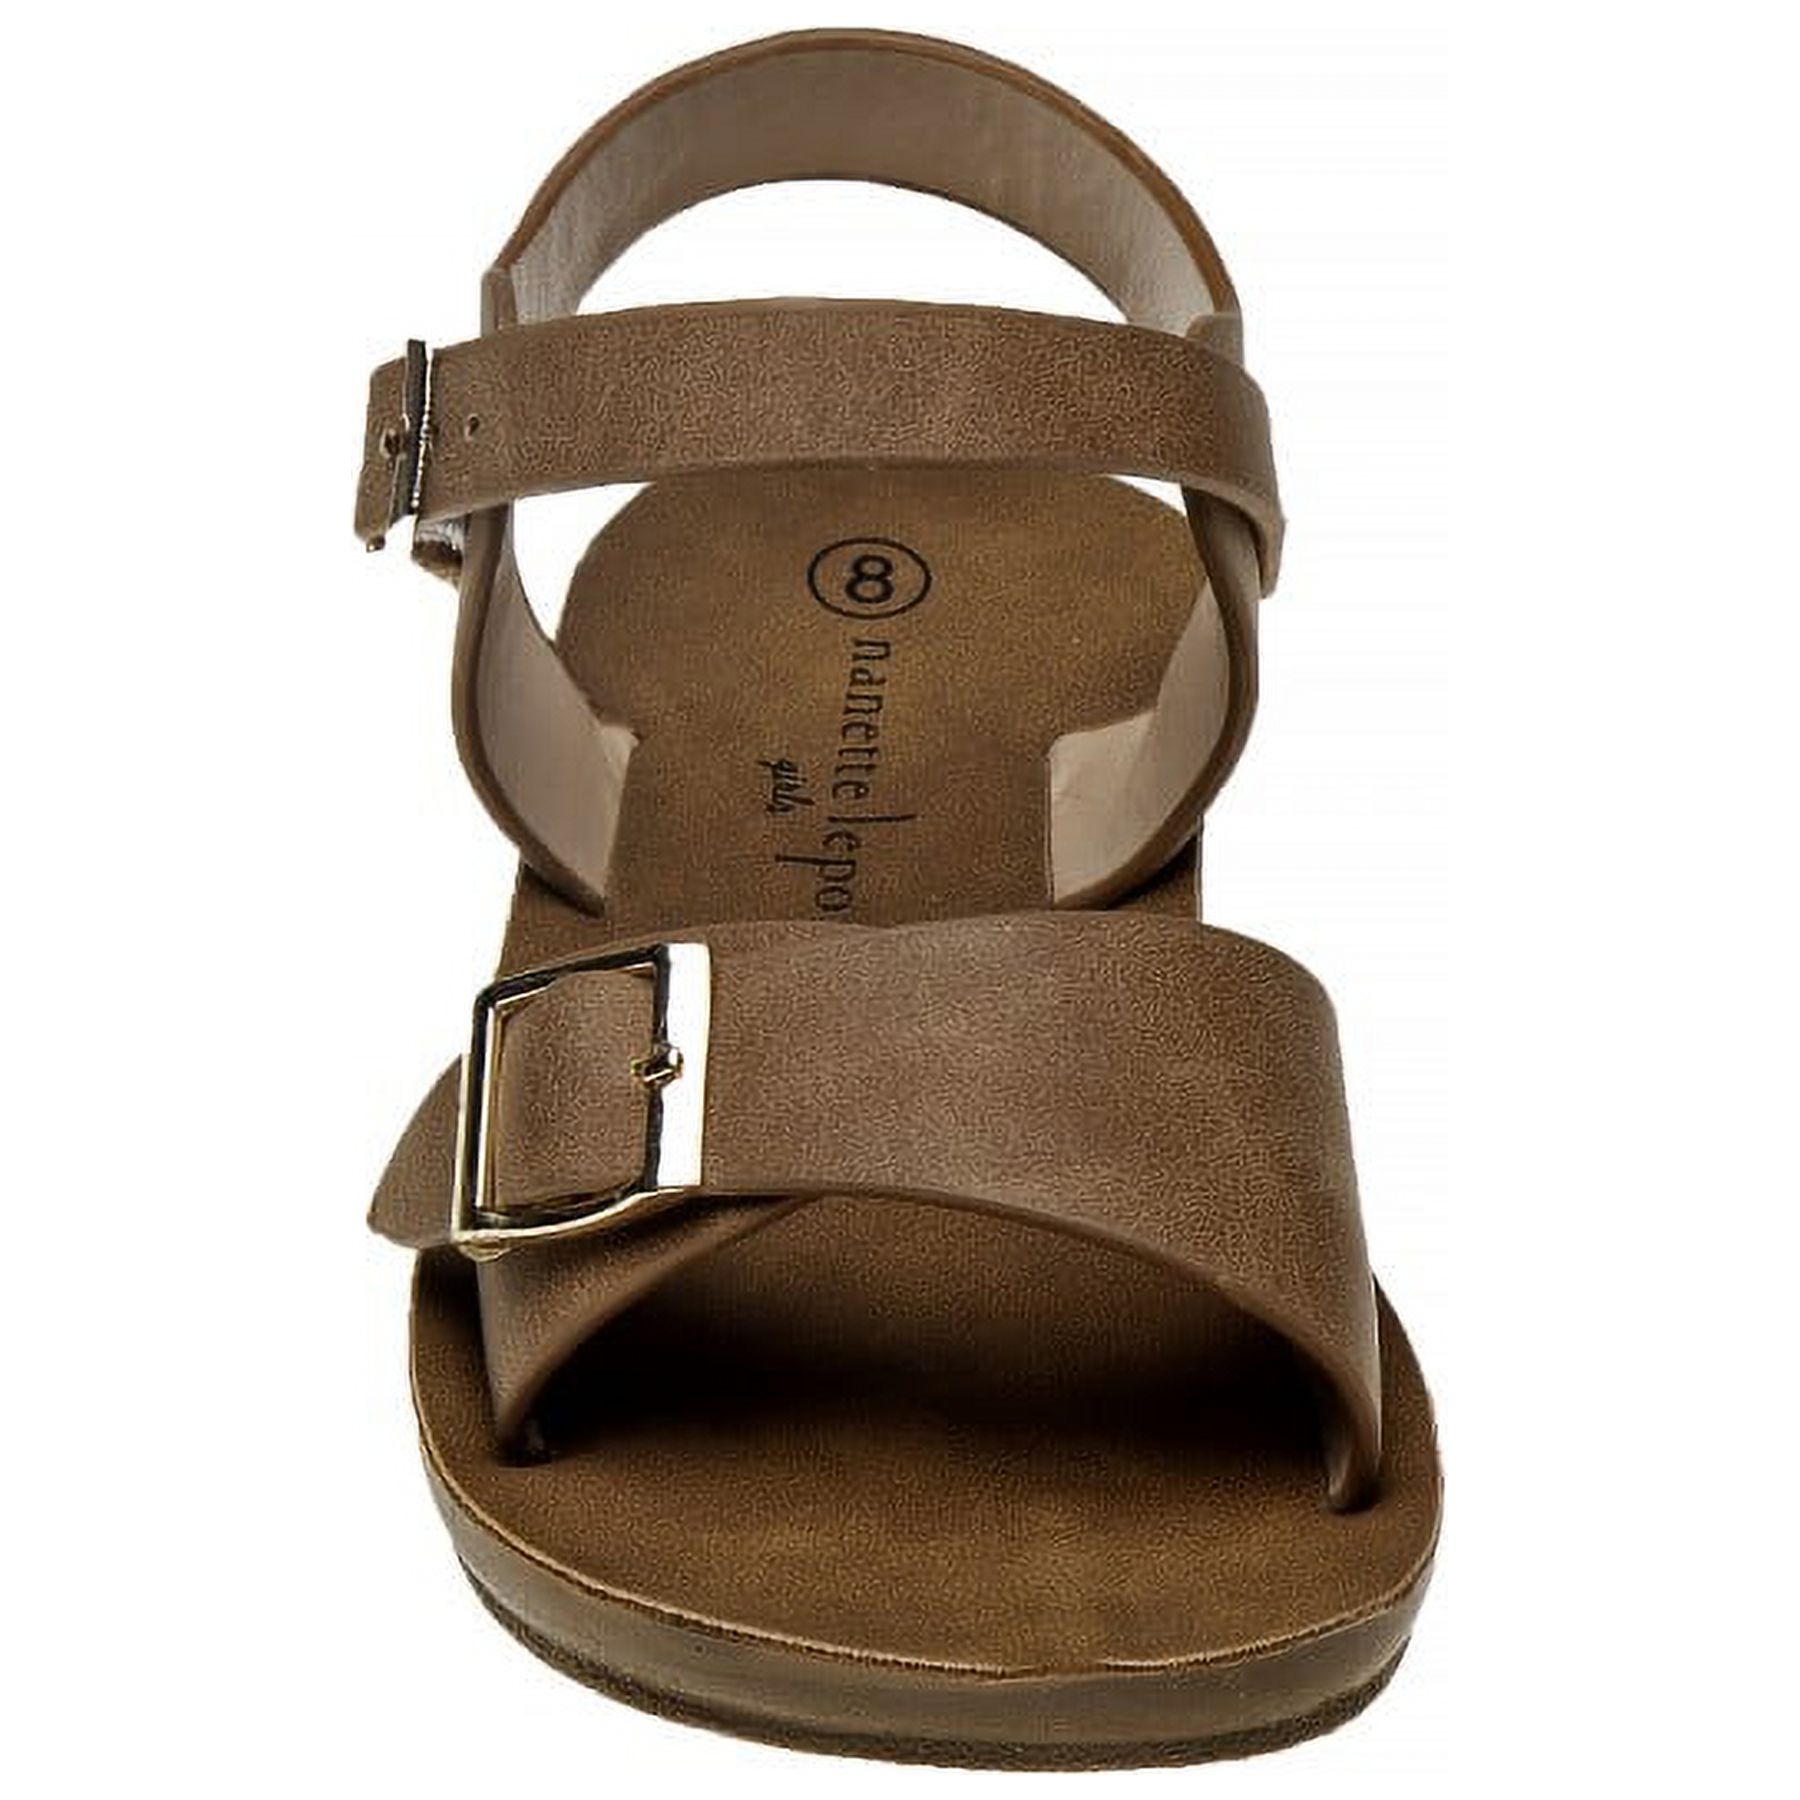 Nanette Lepore  Sandals with Double Buckle for Toddler Girls - Tan, 6 - image 5 of 7